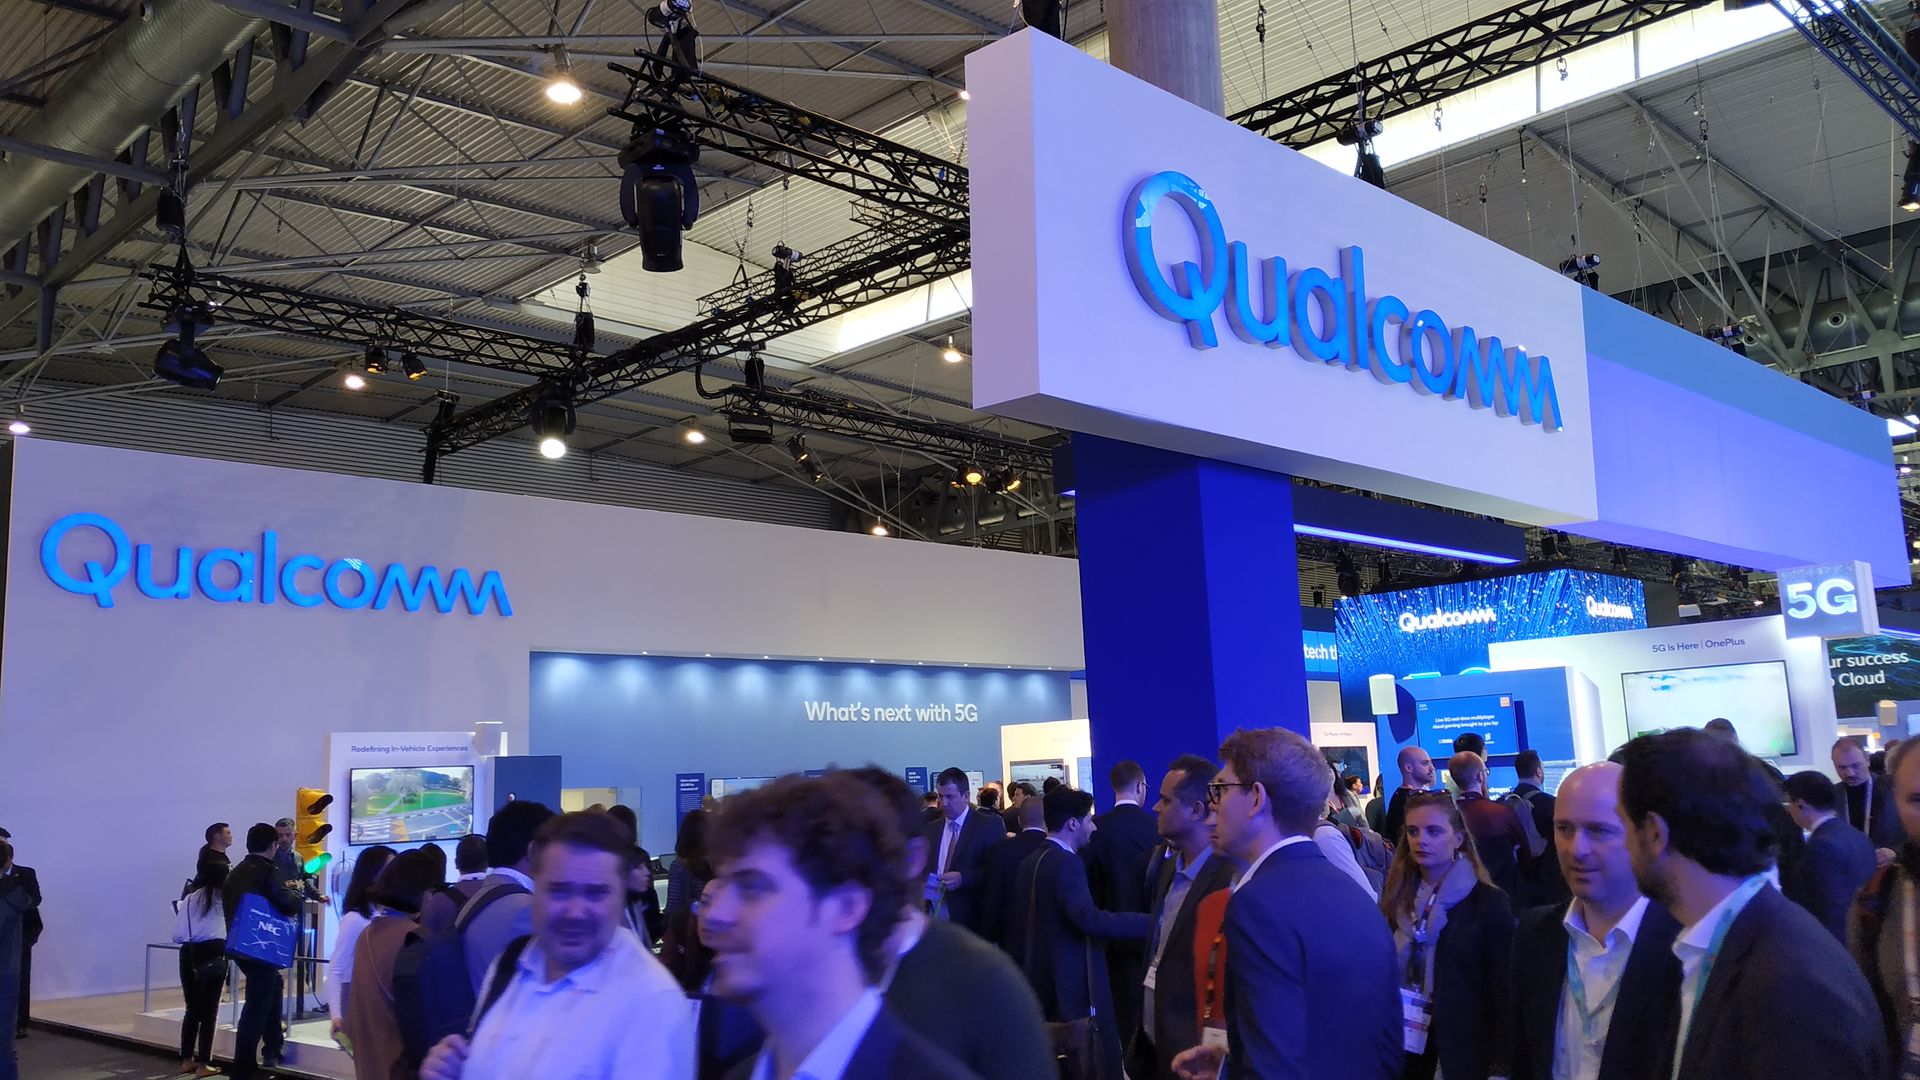 Qualcomm's booth at Mobile World Congress